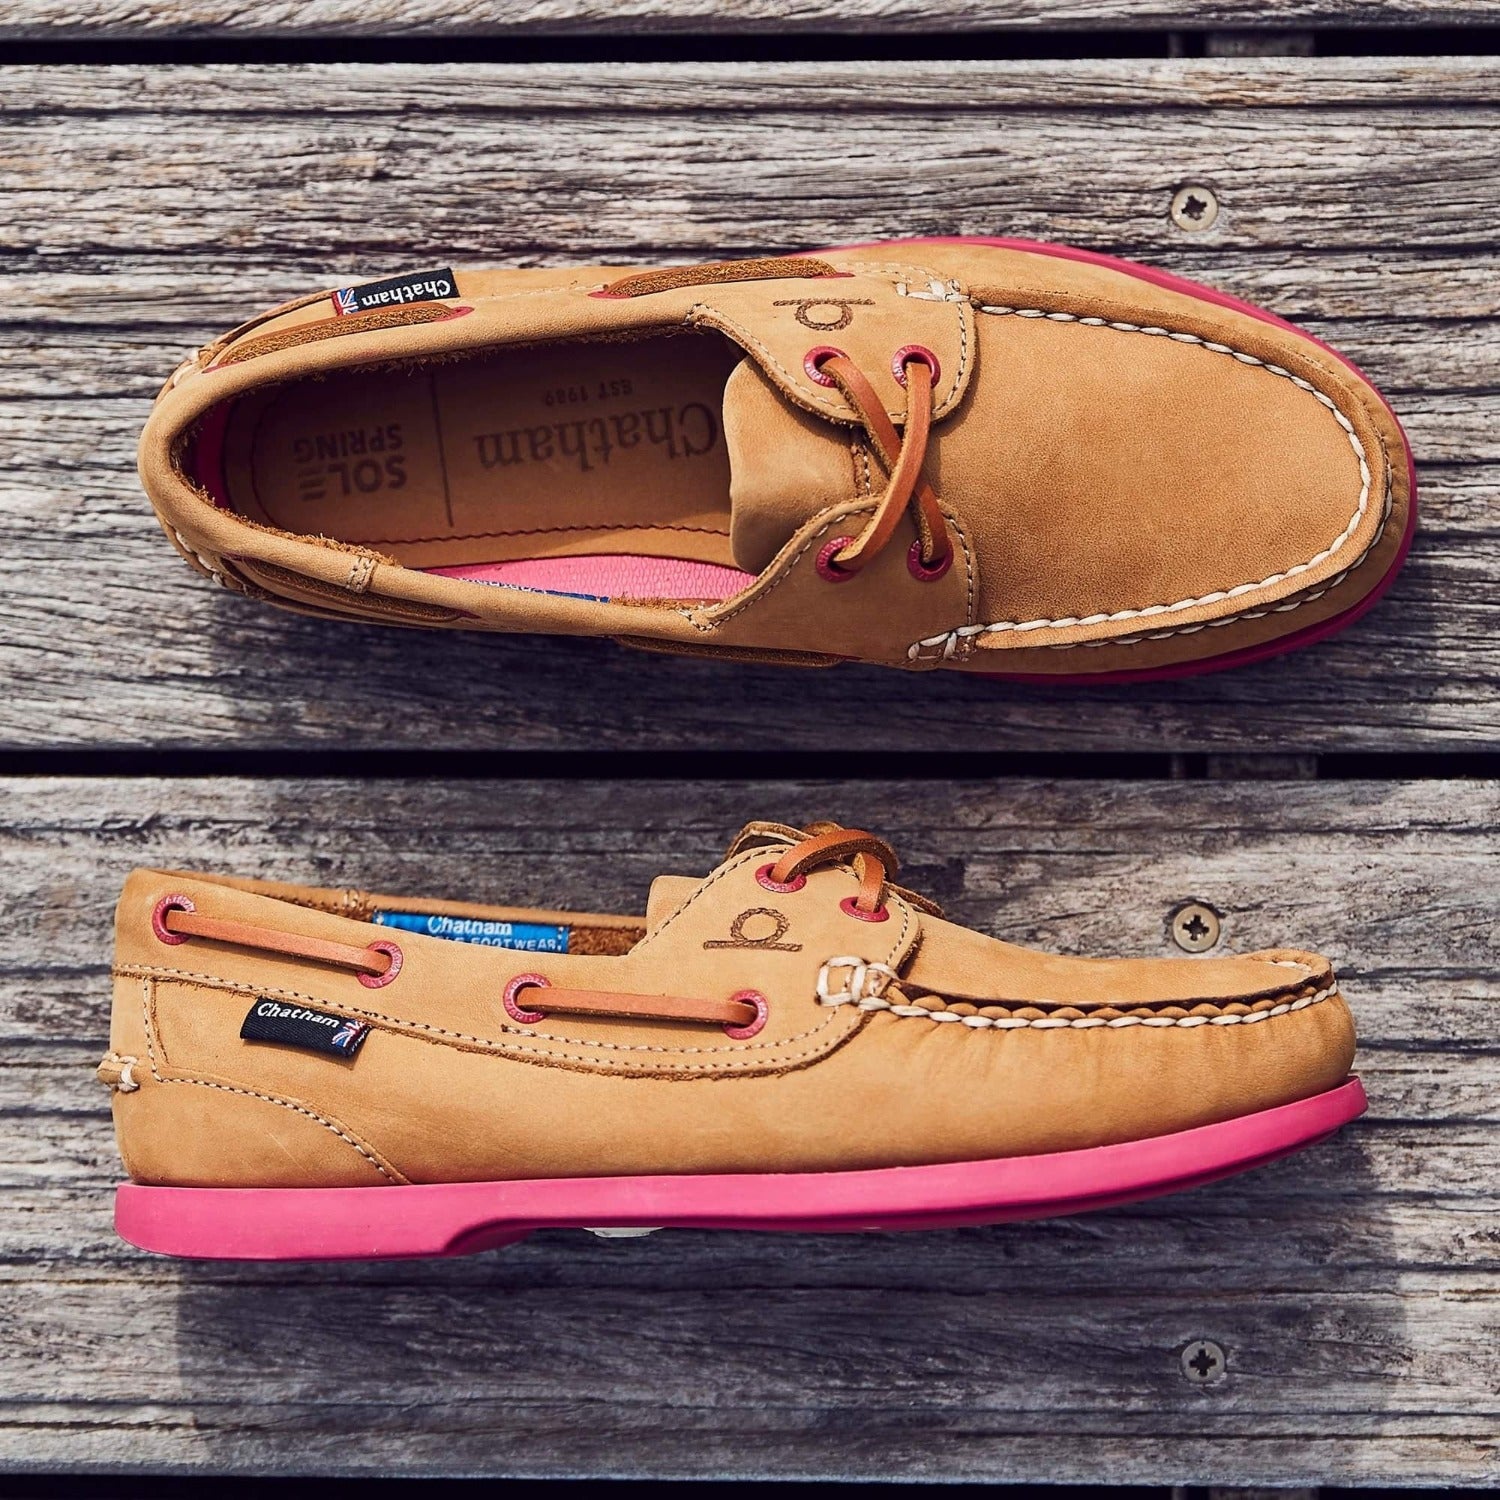 Chatham Pippa Ladies G2 Boat Shoes in Washable Tan Nubuck Leather with Pink Soles